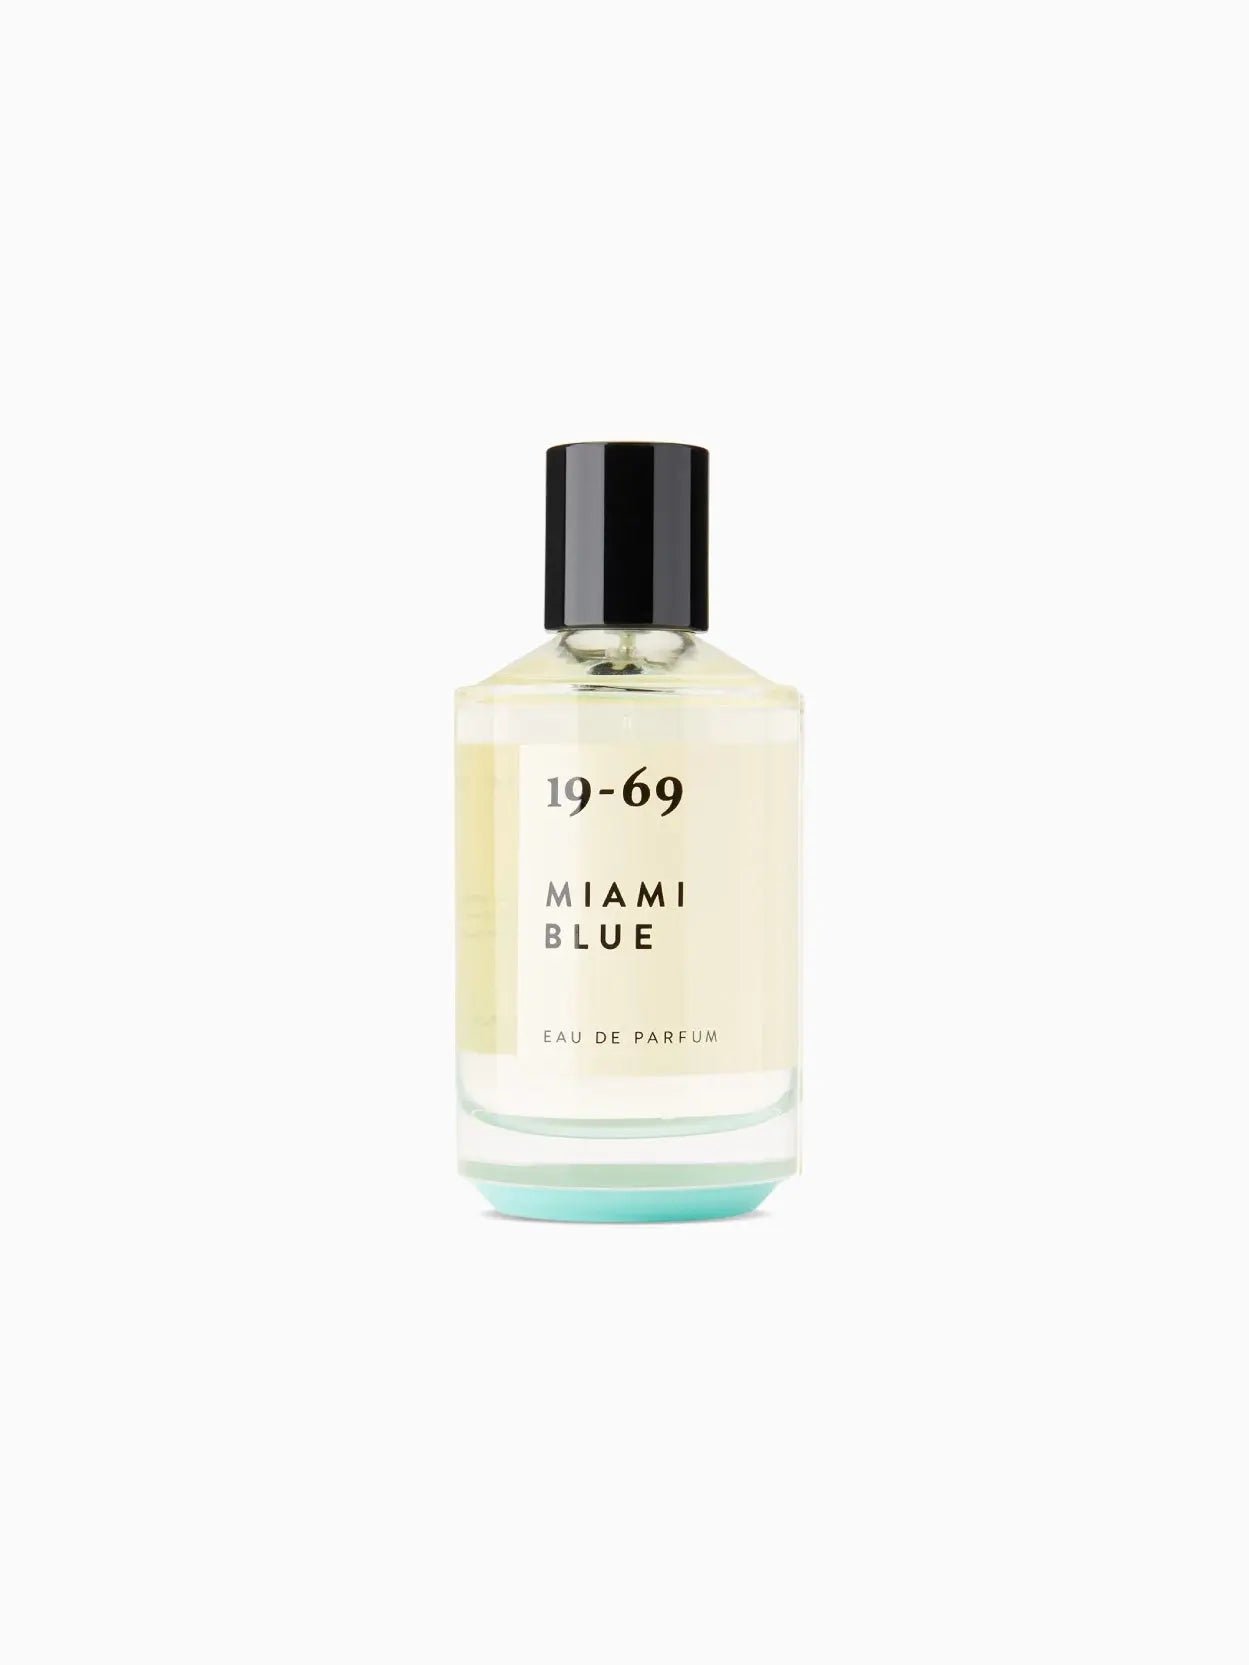 A clear glass bottle of perfume labeled "19-69 Miami Blue 100ml" with black text. The bottle, available at Bassalstore, has a black cap and contains a light yellow liquid. The text below the name reads "EAU DE PARFUM." The background is white.